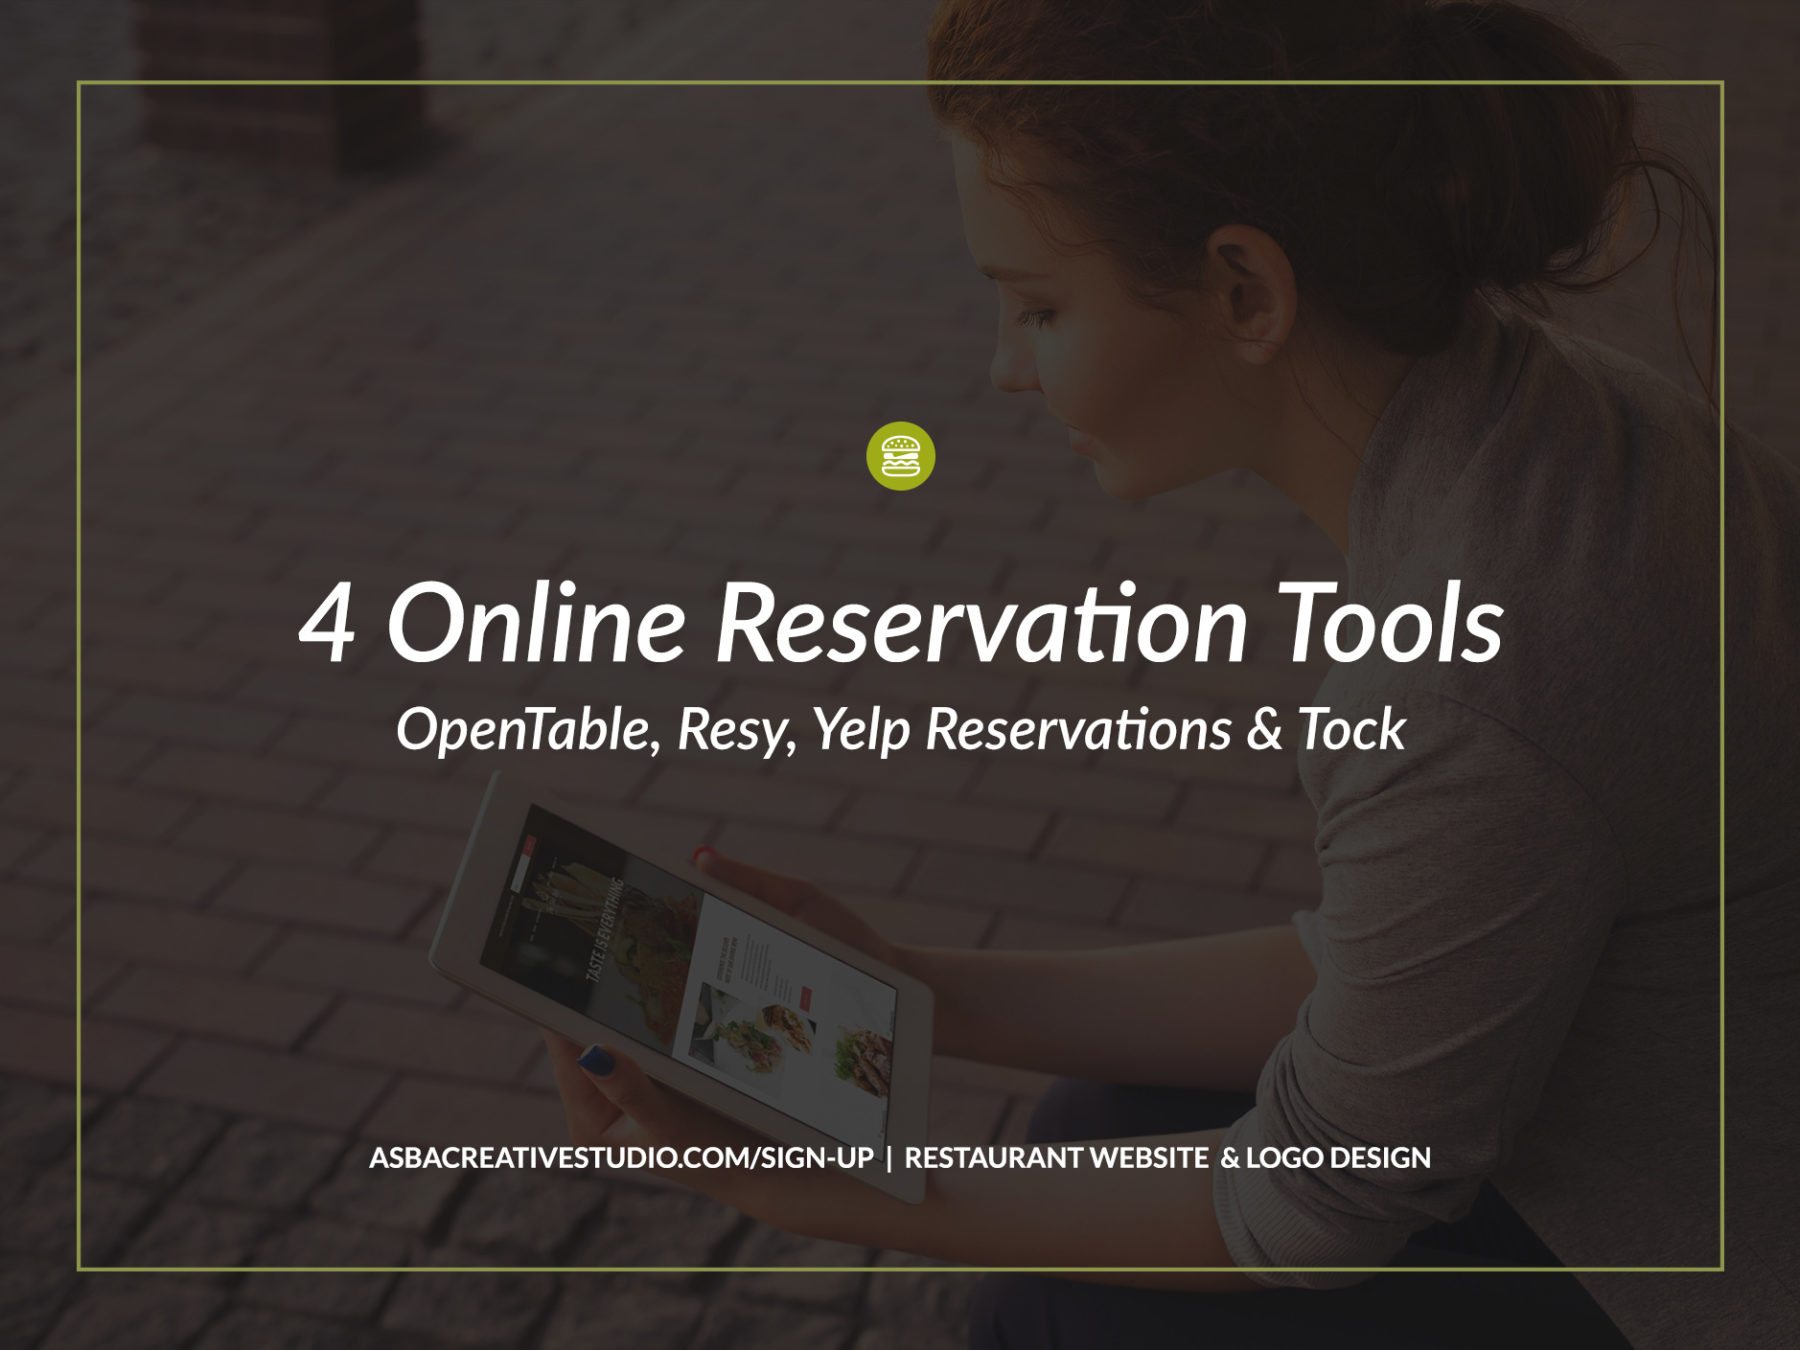 4 Online Reservation Tools – OpenTable, Resy, Yelp Reservations & Tock